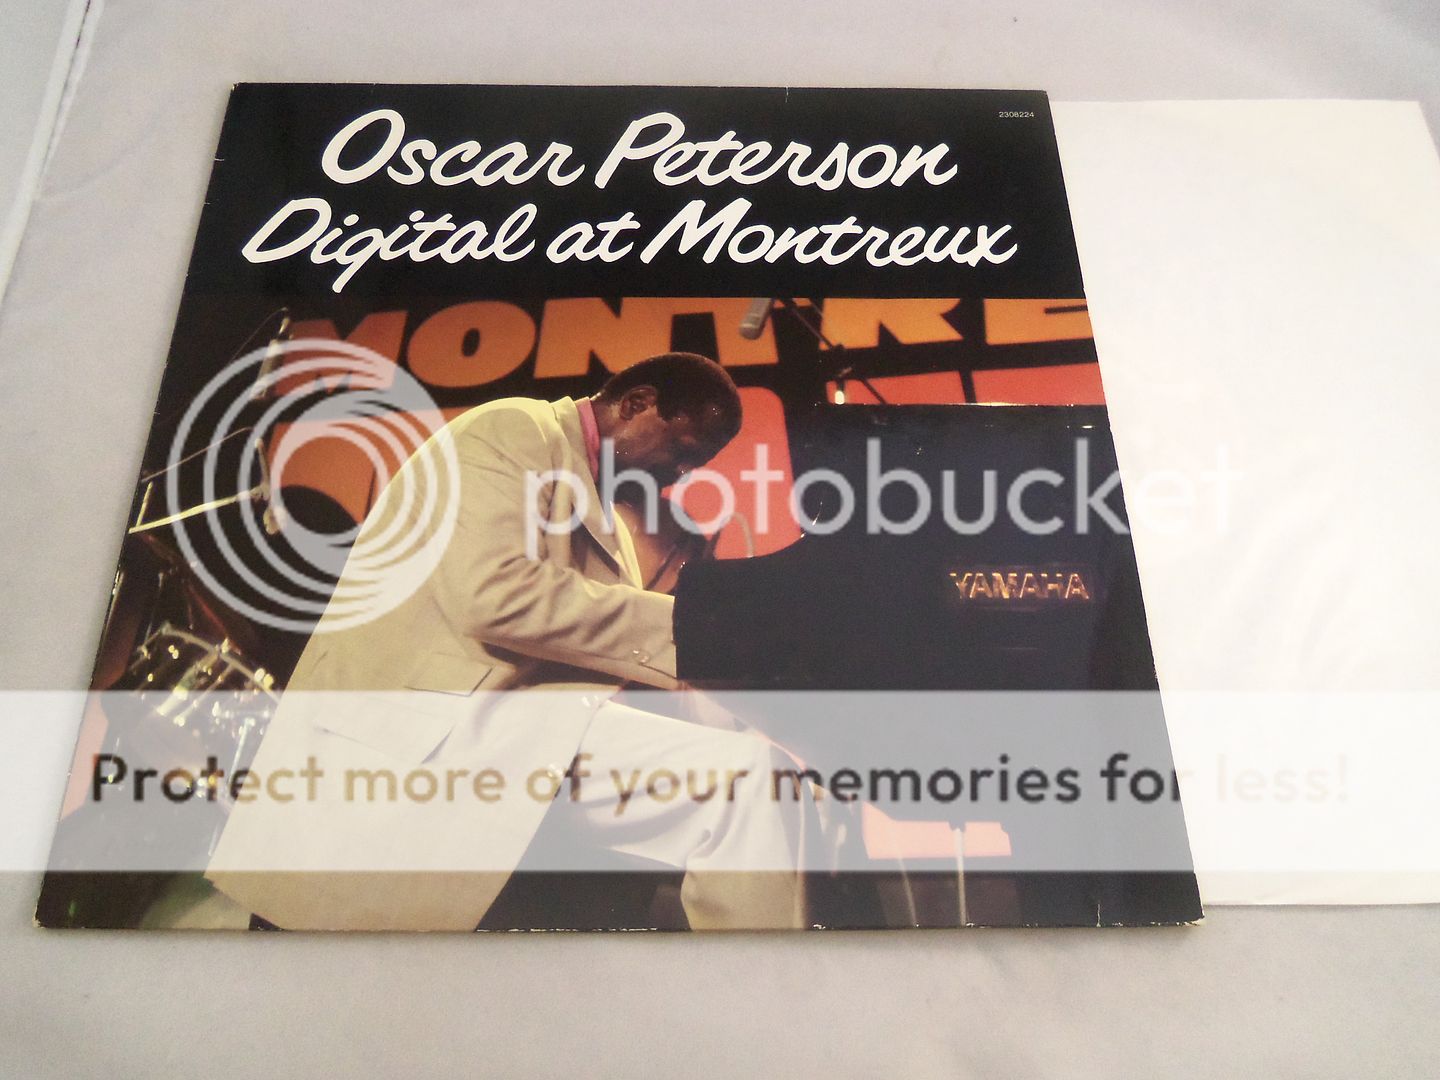 Oscar Peterson Digital At Montreux Records, Vinyl and CDs - Hard to ...